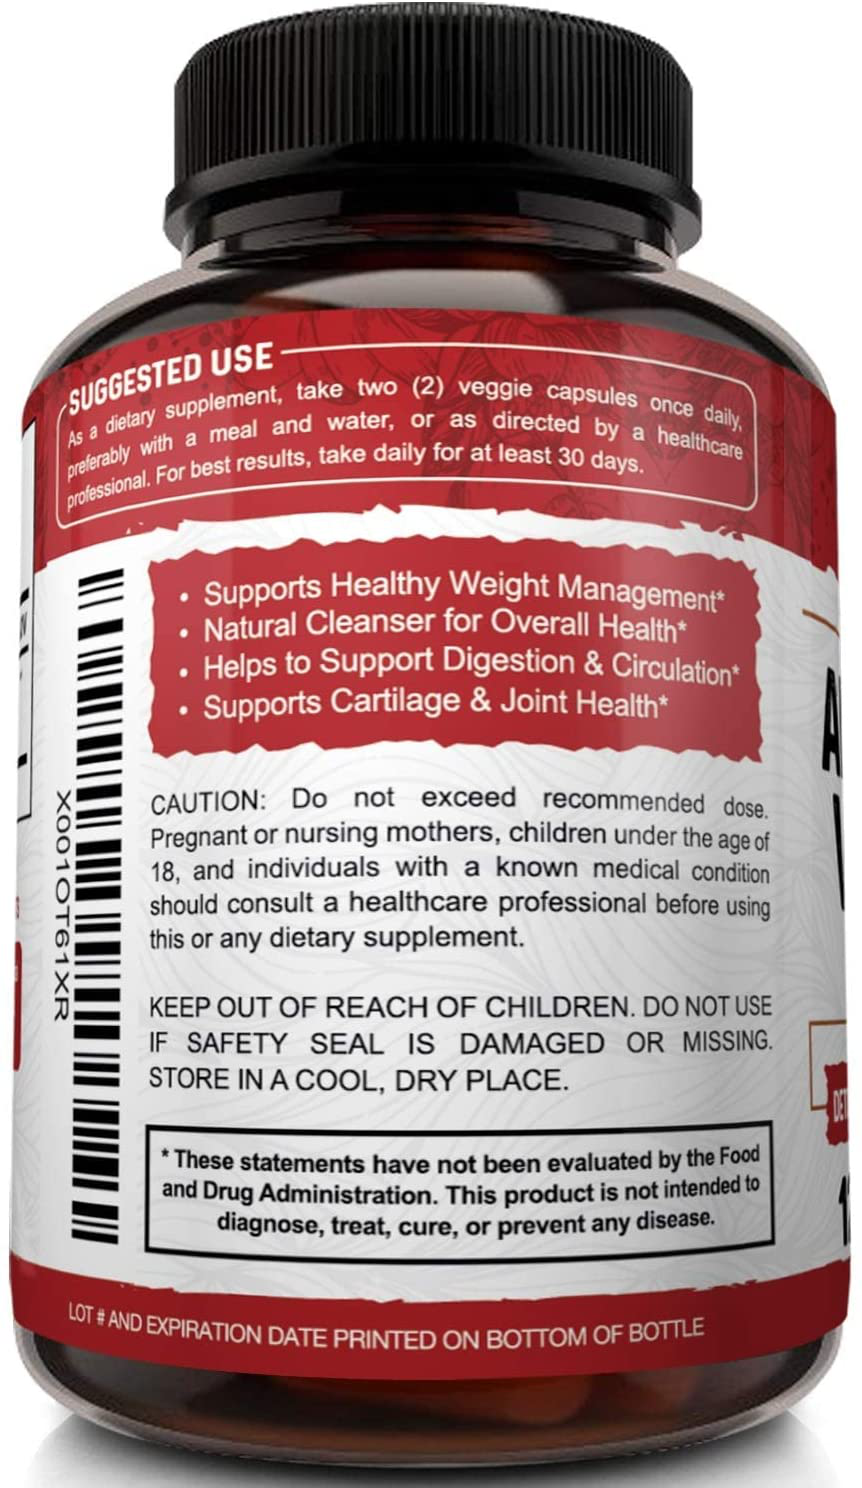 Apple Cider Vinegar Capsules with Mother 1600Mg - 120 Vegan ACV Pills - Best Supplement for Healthy Weight Loss, Diet, Keto, Digestion, Detox, Immune - Powerful Cleanser & Appetite Suppressant Non-Gmo